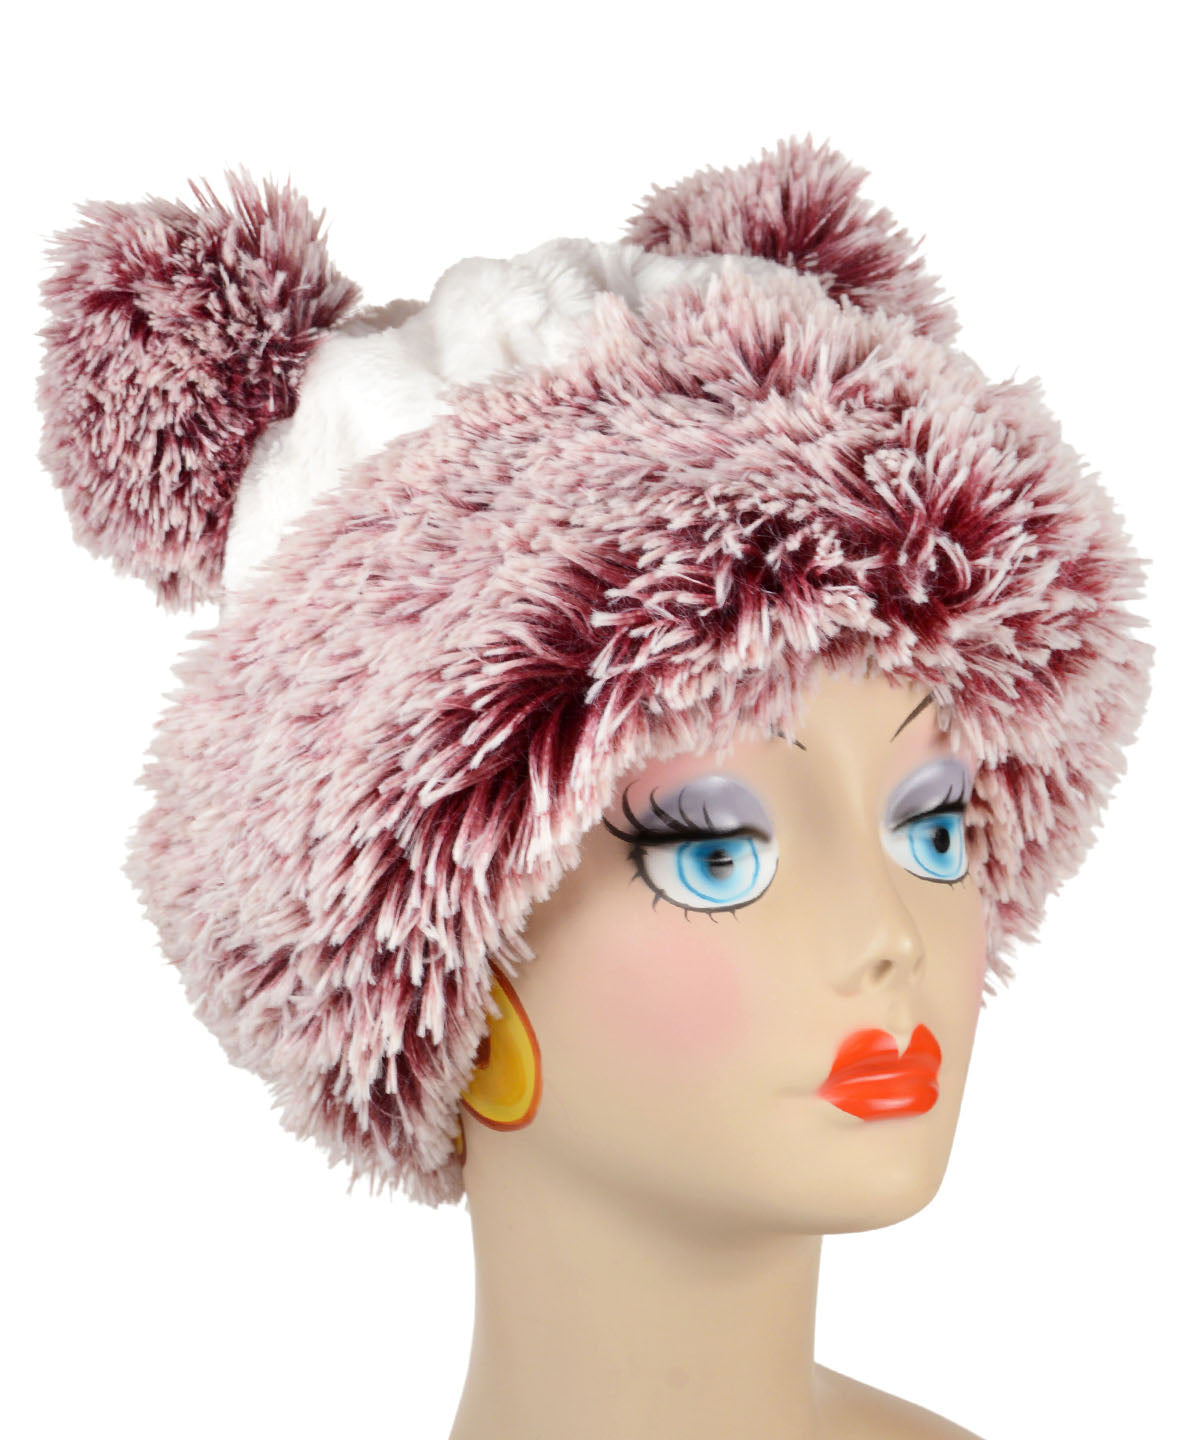 Product Shot of Bear Beanie Hat with ears, in Cuddly Ivory and Berry Foxy Faux Fur. Slight side angle view. Handmade by Pandemonium Millinery.